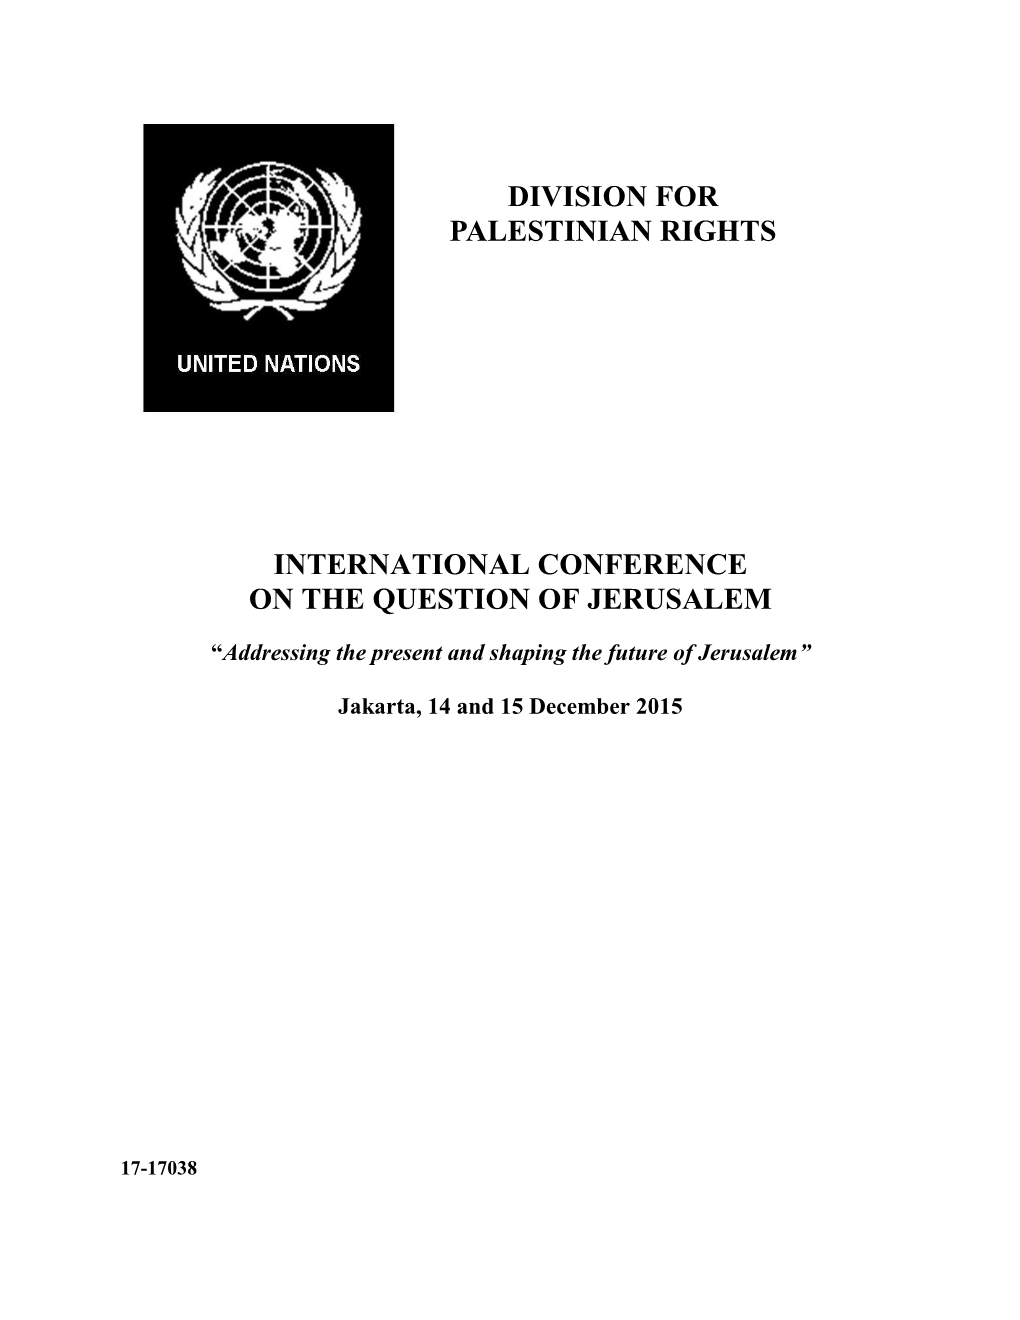 Division for Palestinian Rights International Conference on The